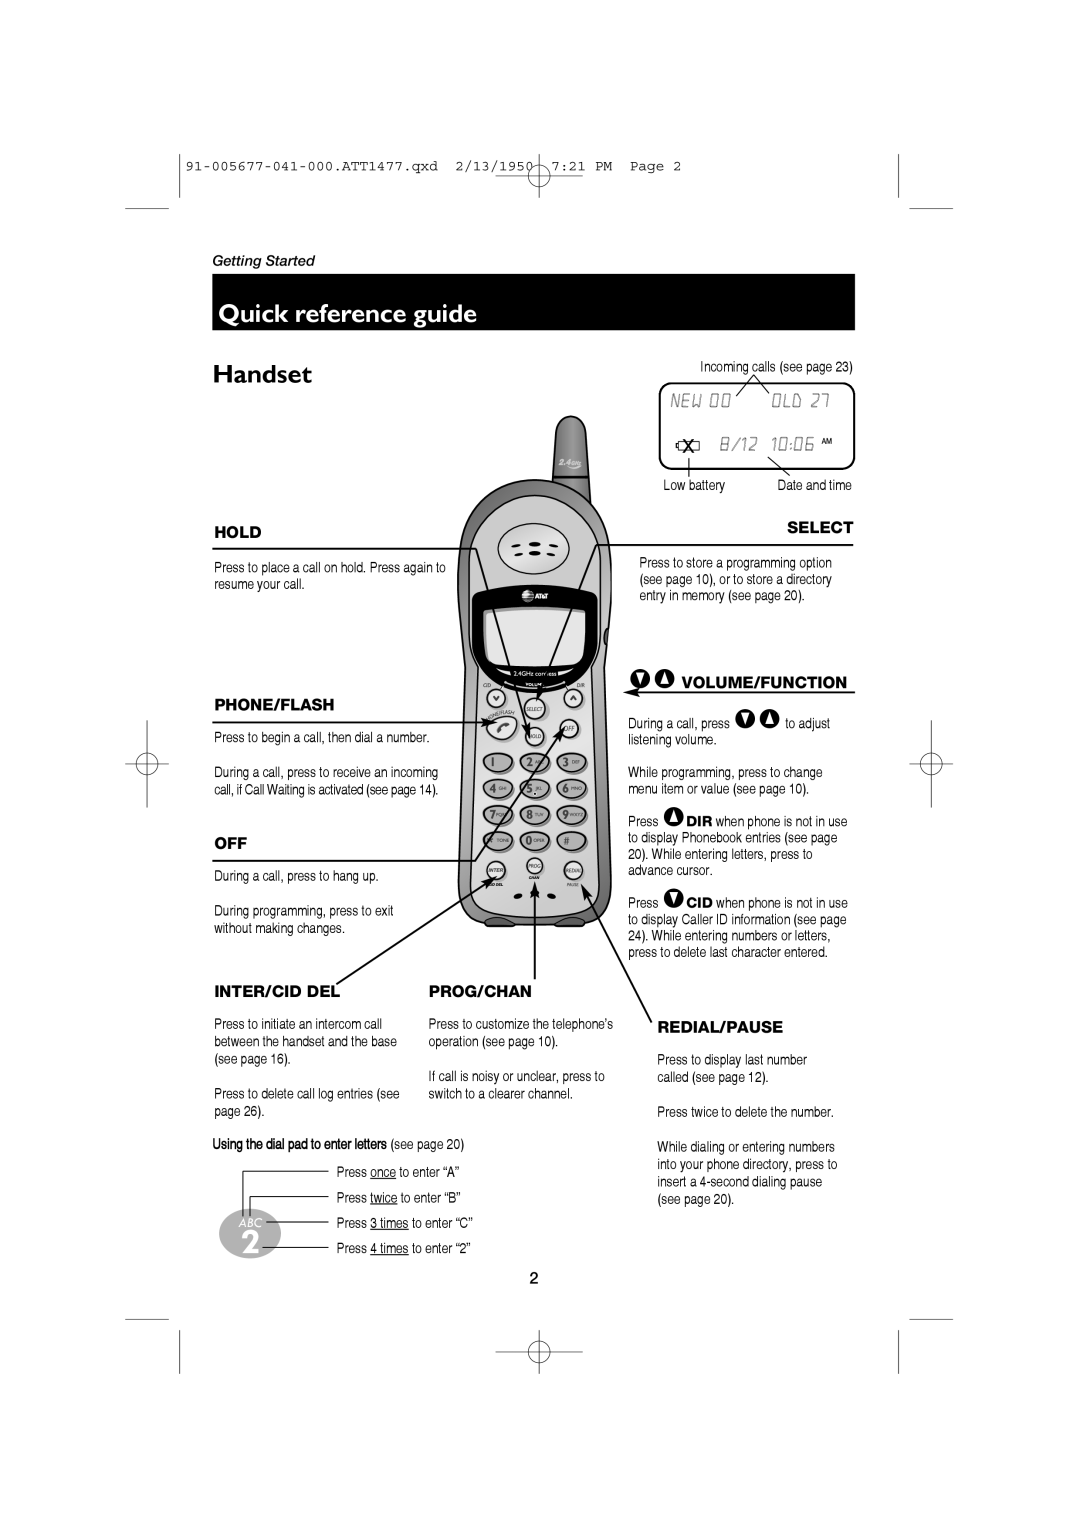 AT&T 1177 user manual Quick reference guide, Handset, 8/12 1006 AM, 91-005677-041-000.ATT1477.qxd 2/13/1950 721 PM Page 